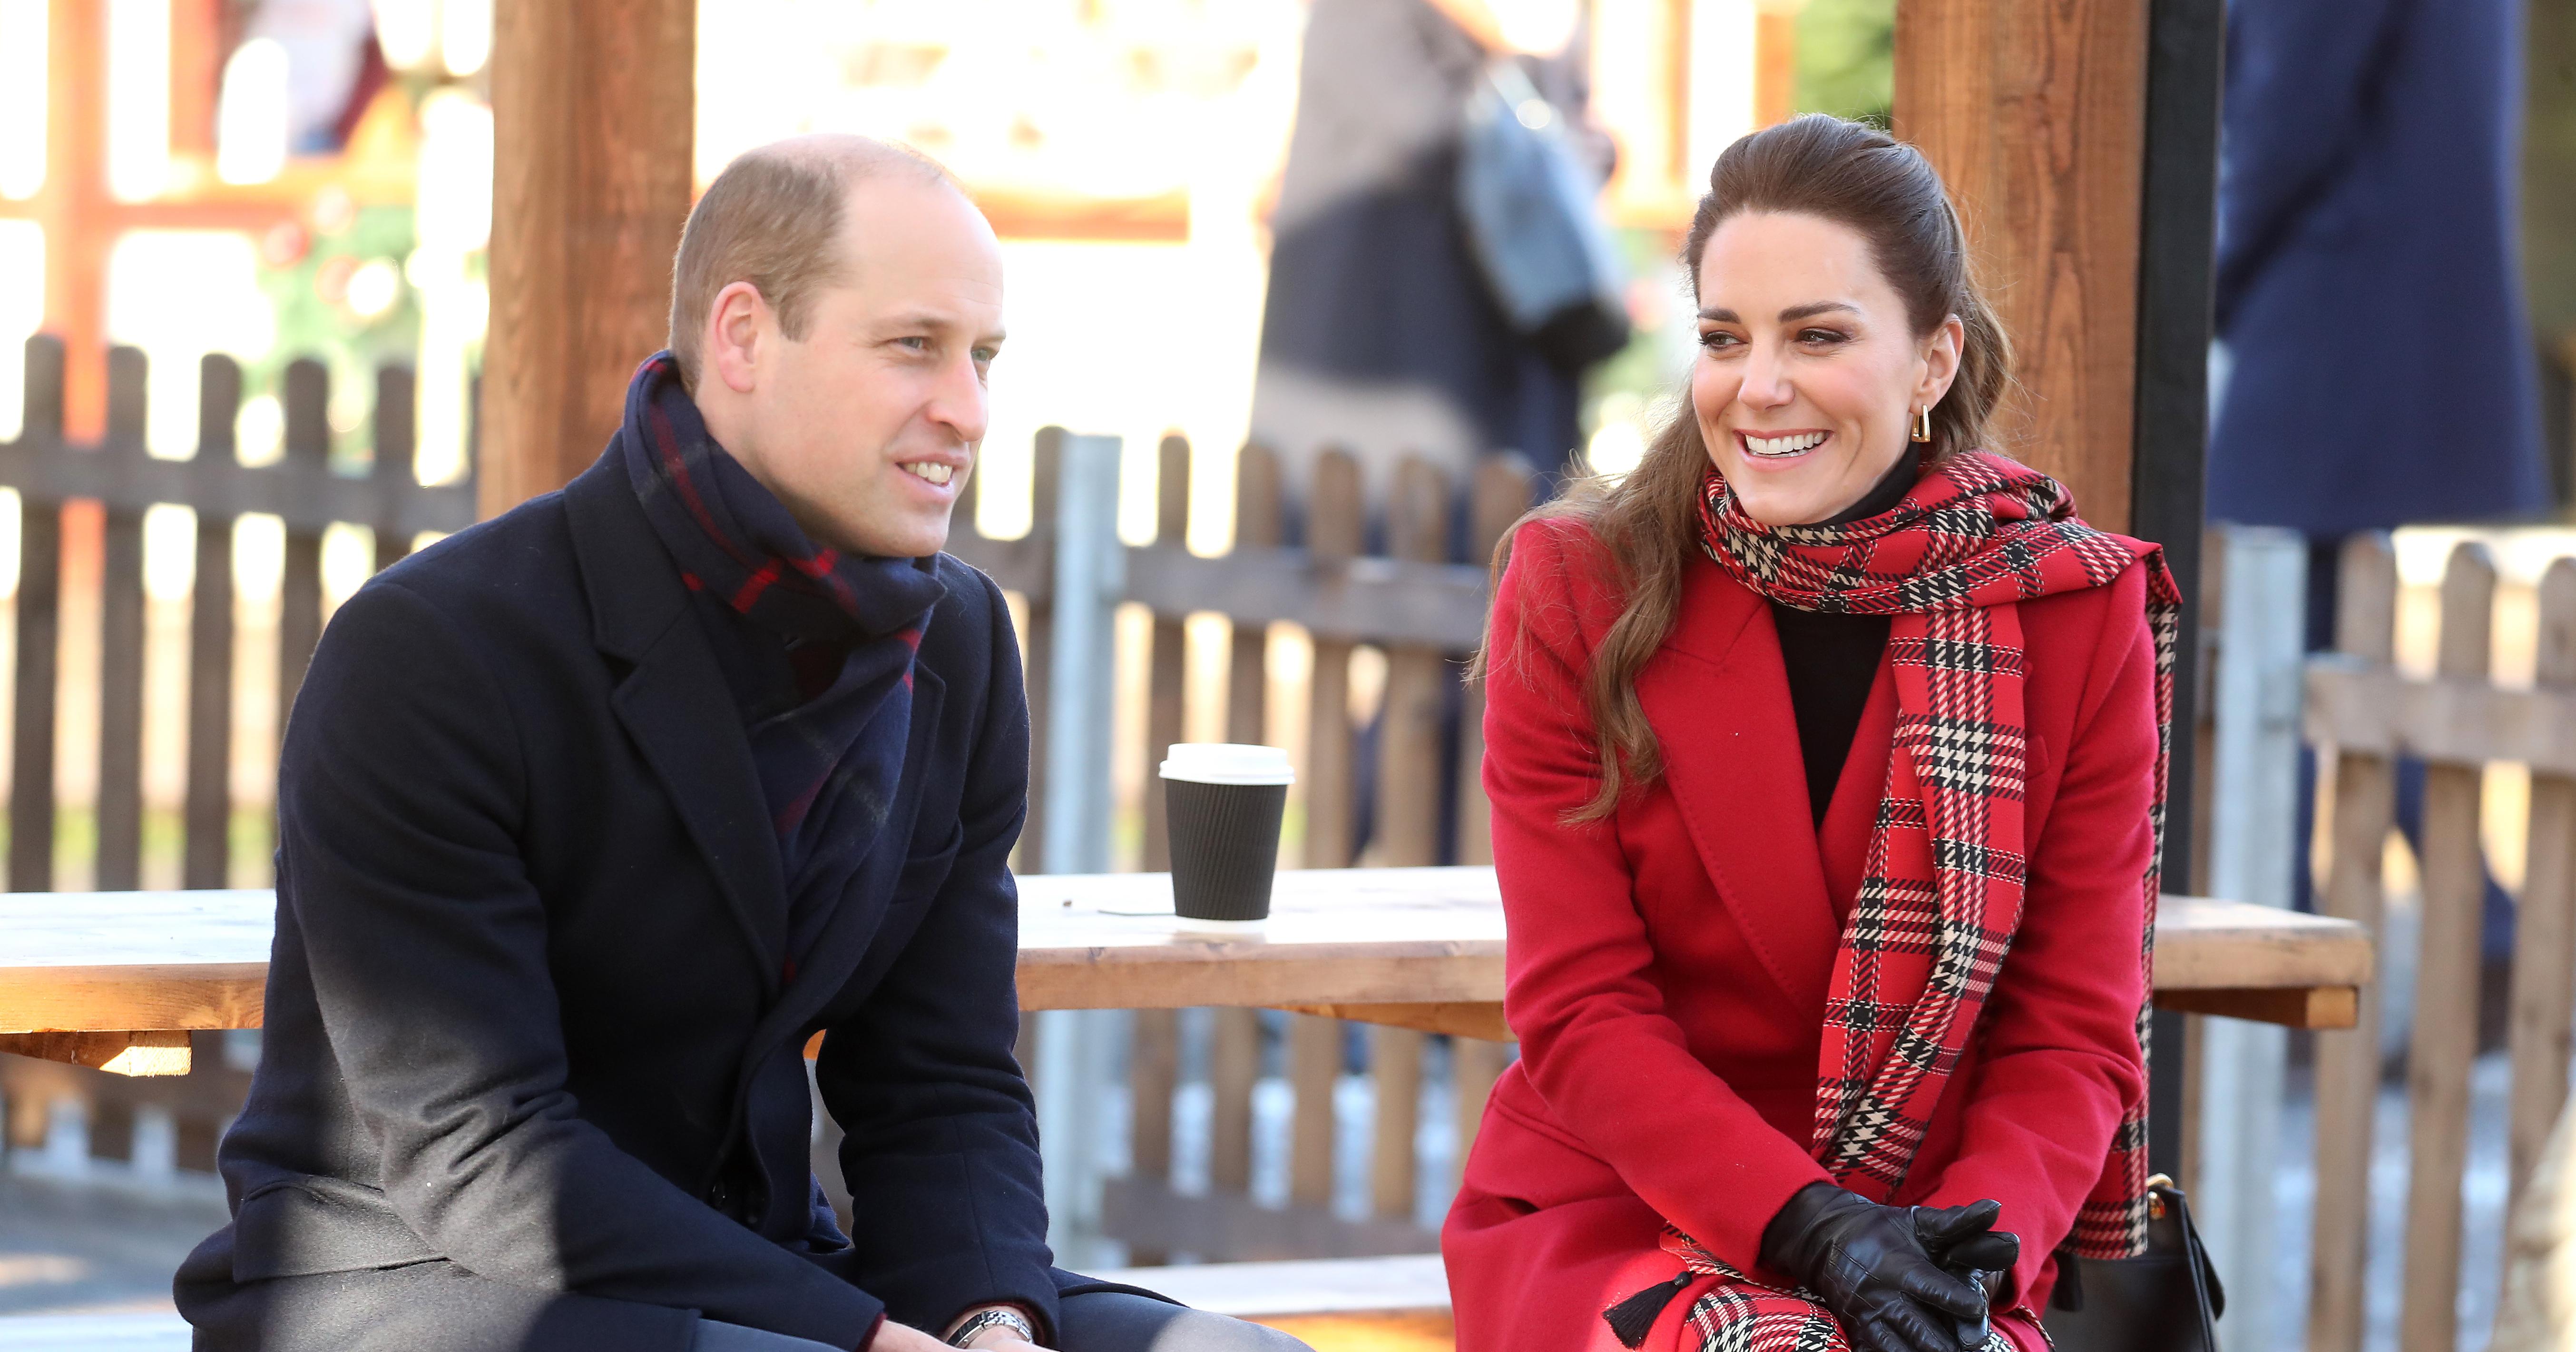 Kate Middleton, Queen to Be, and Prince William